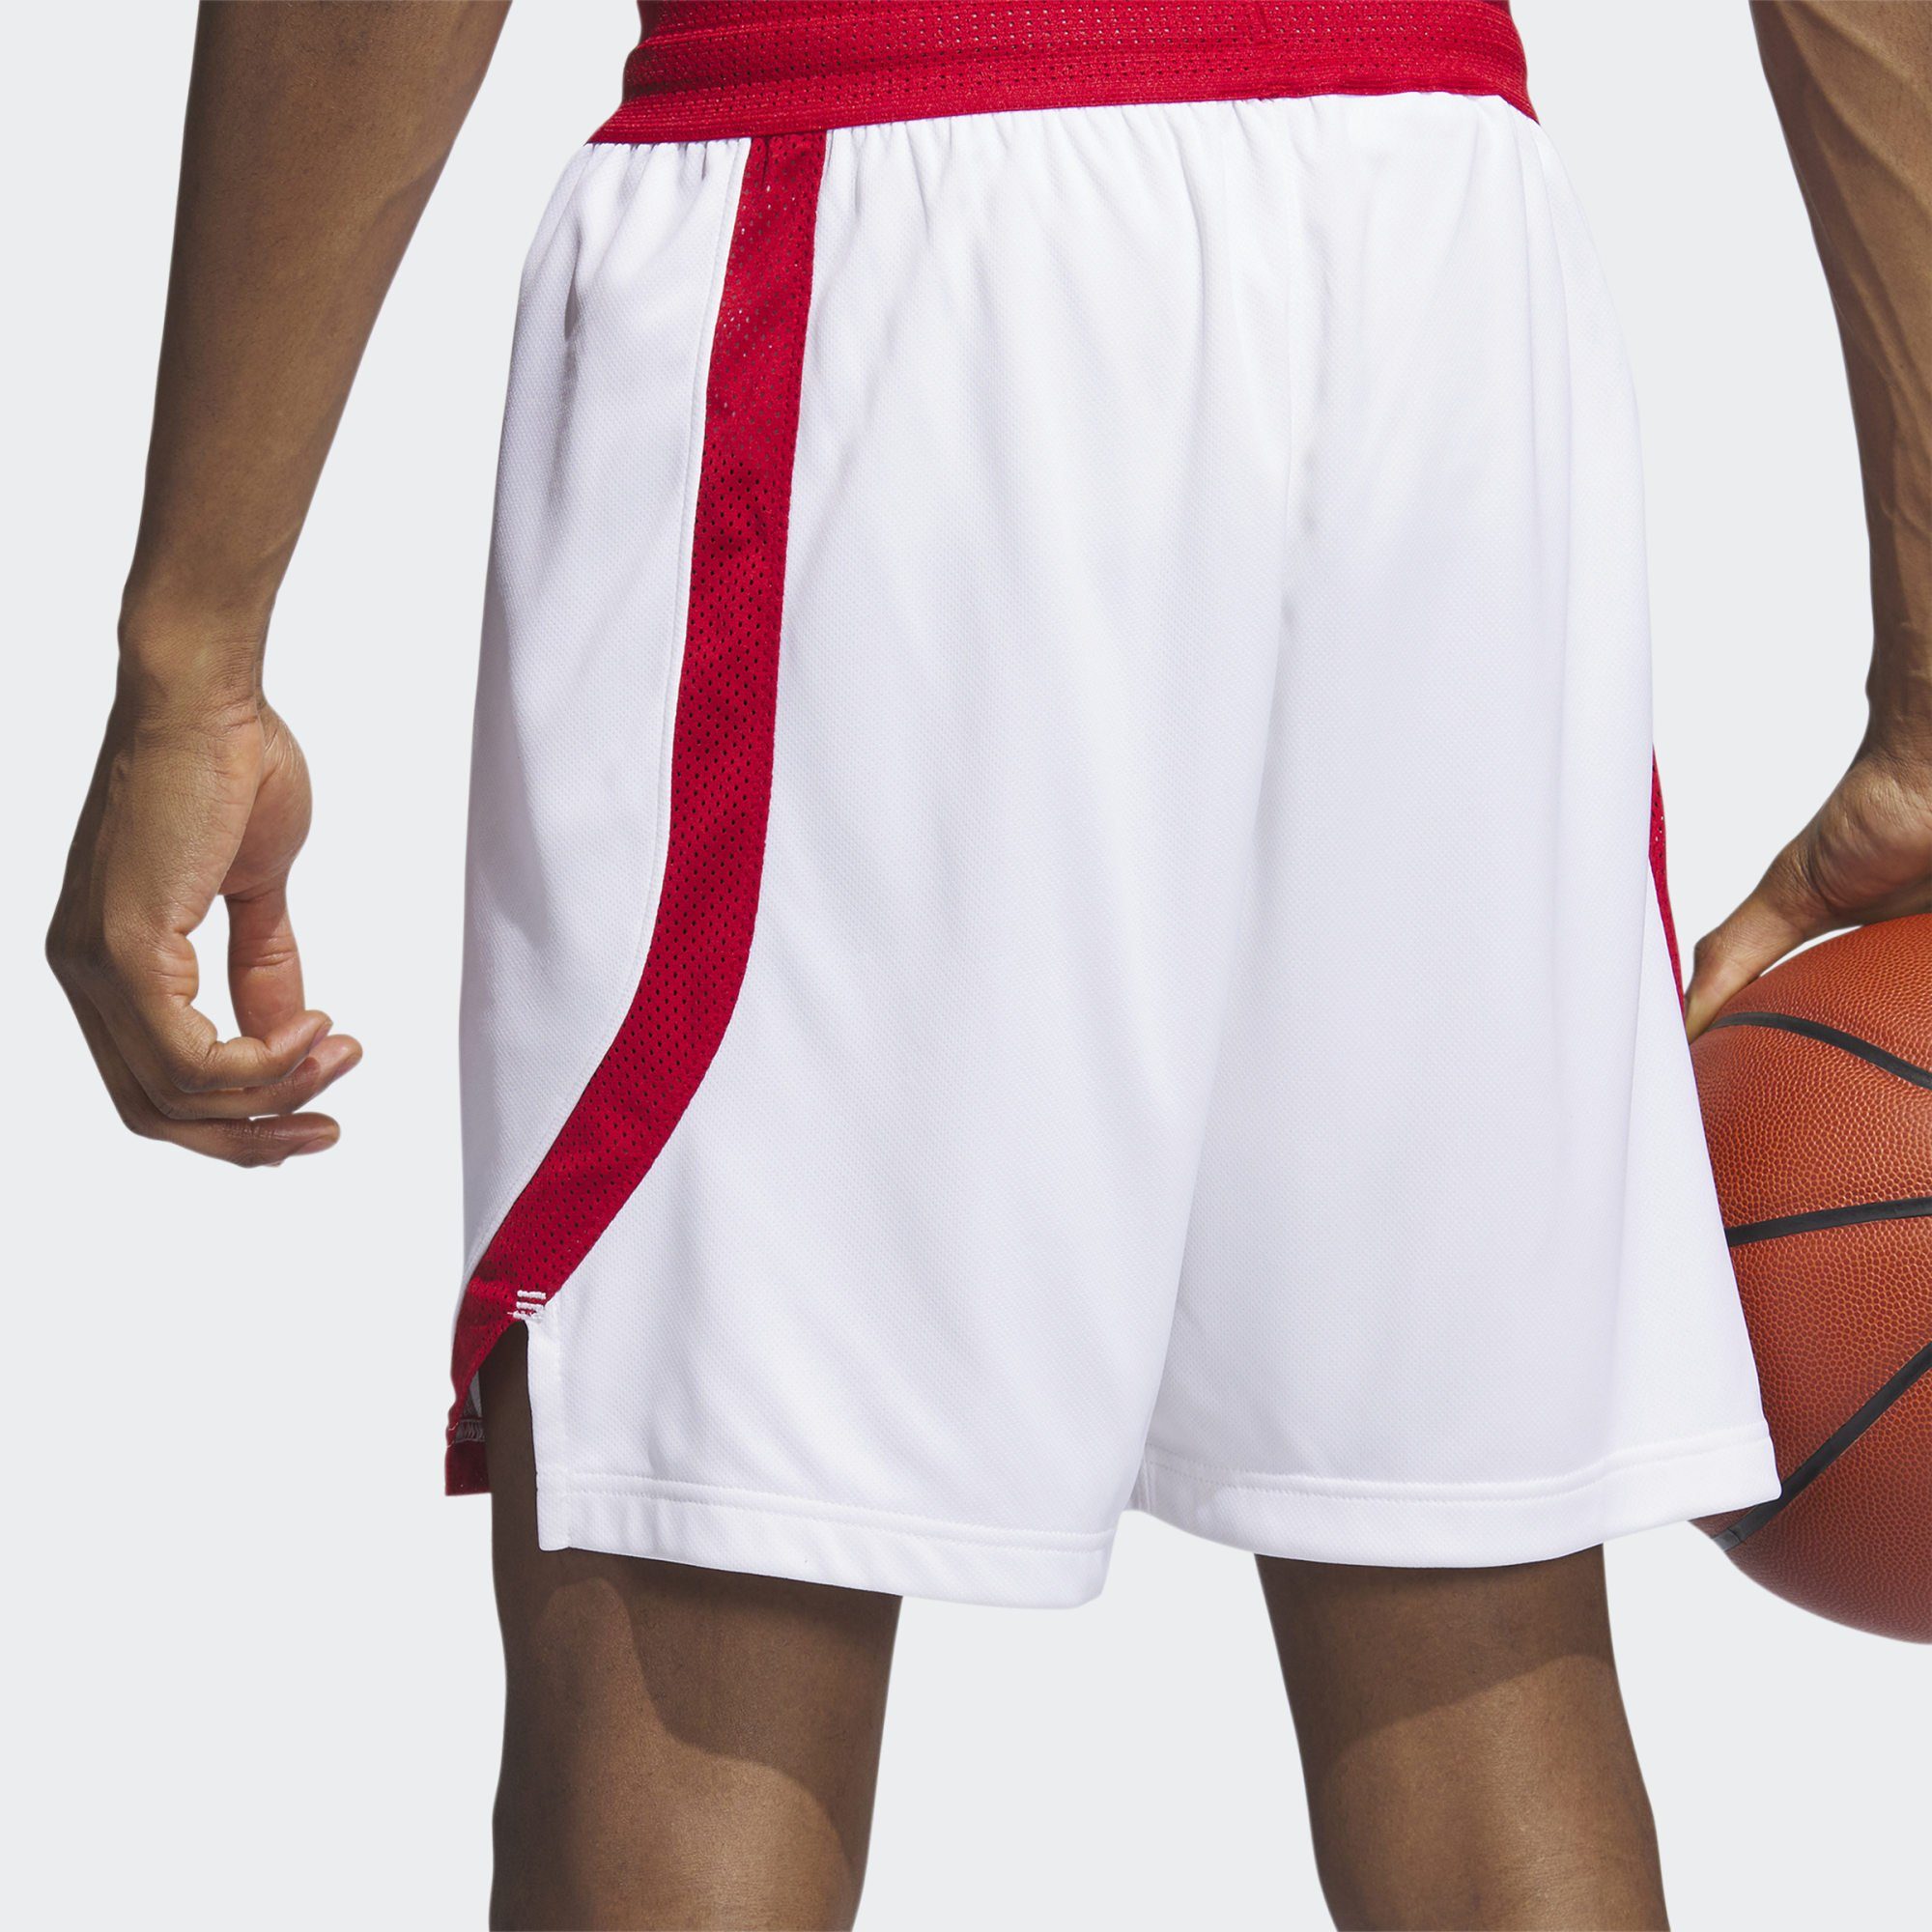 adidas Funktionsshorts Performance / SQUAD Power ICON White SHORTS Red Team